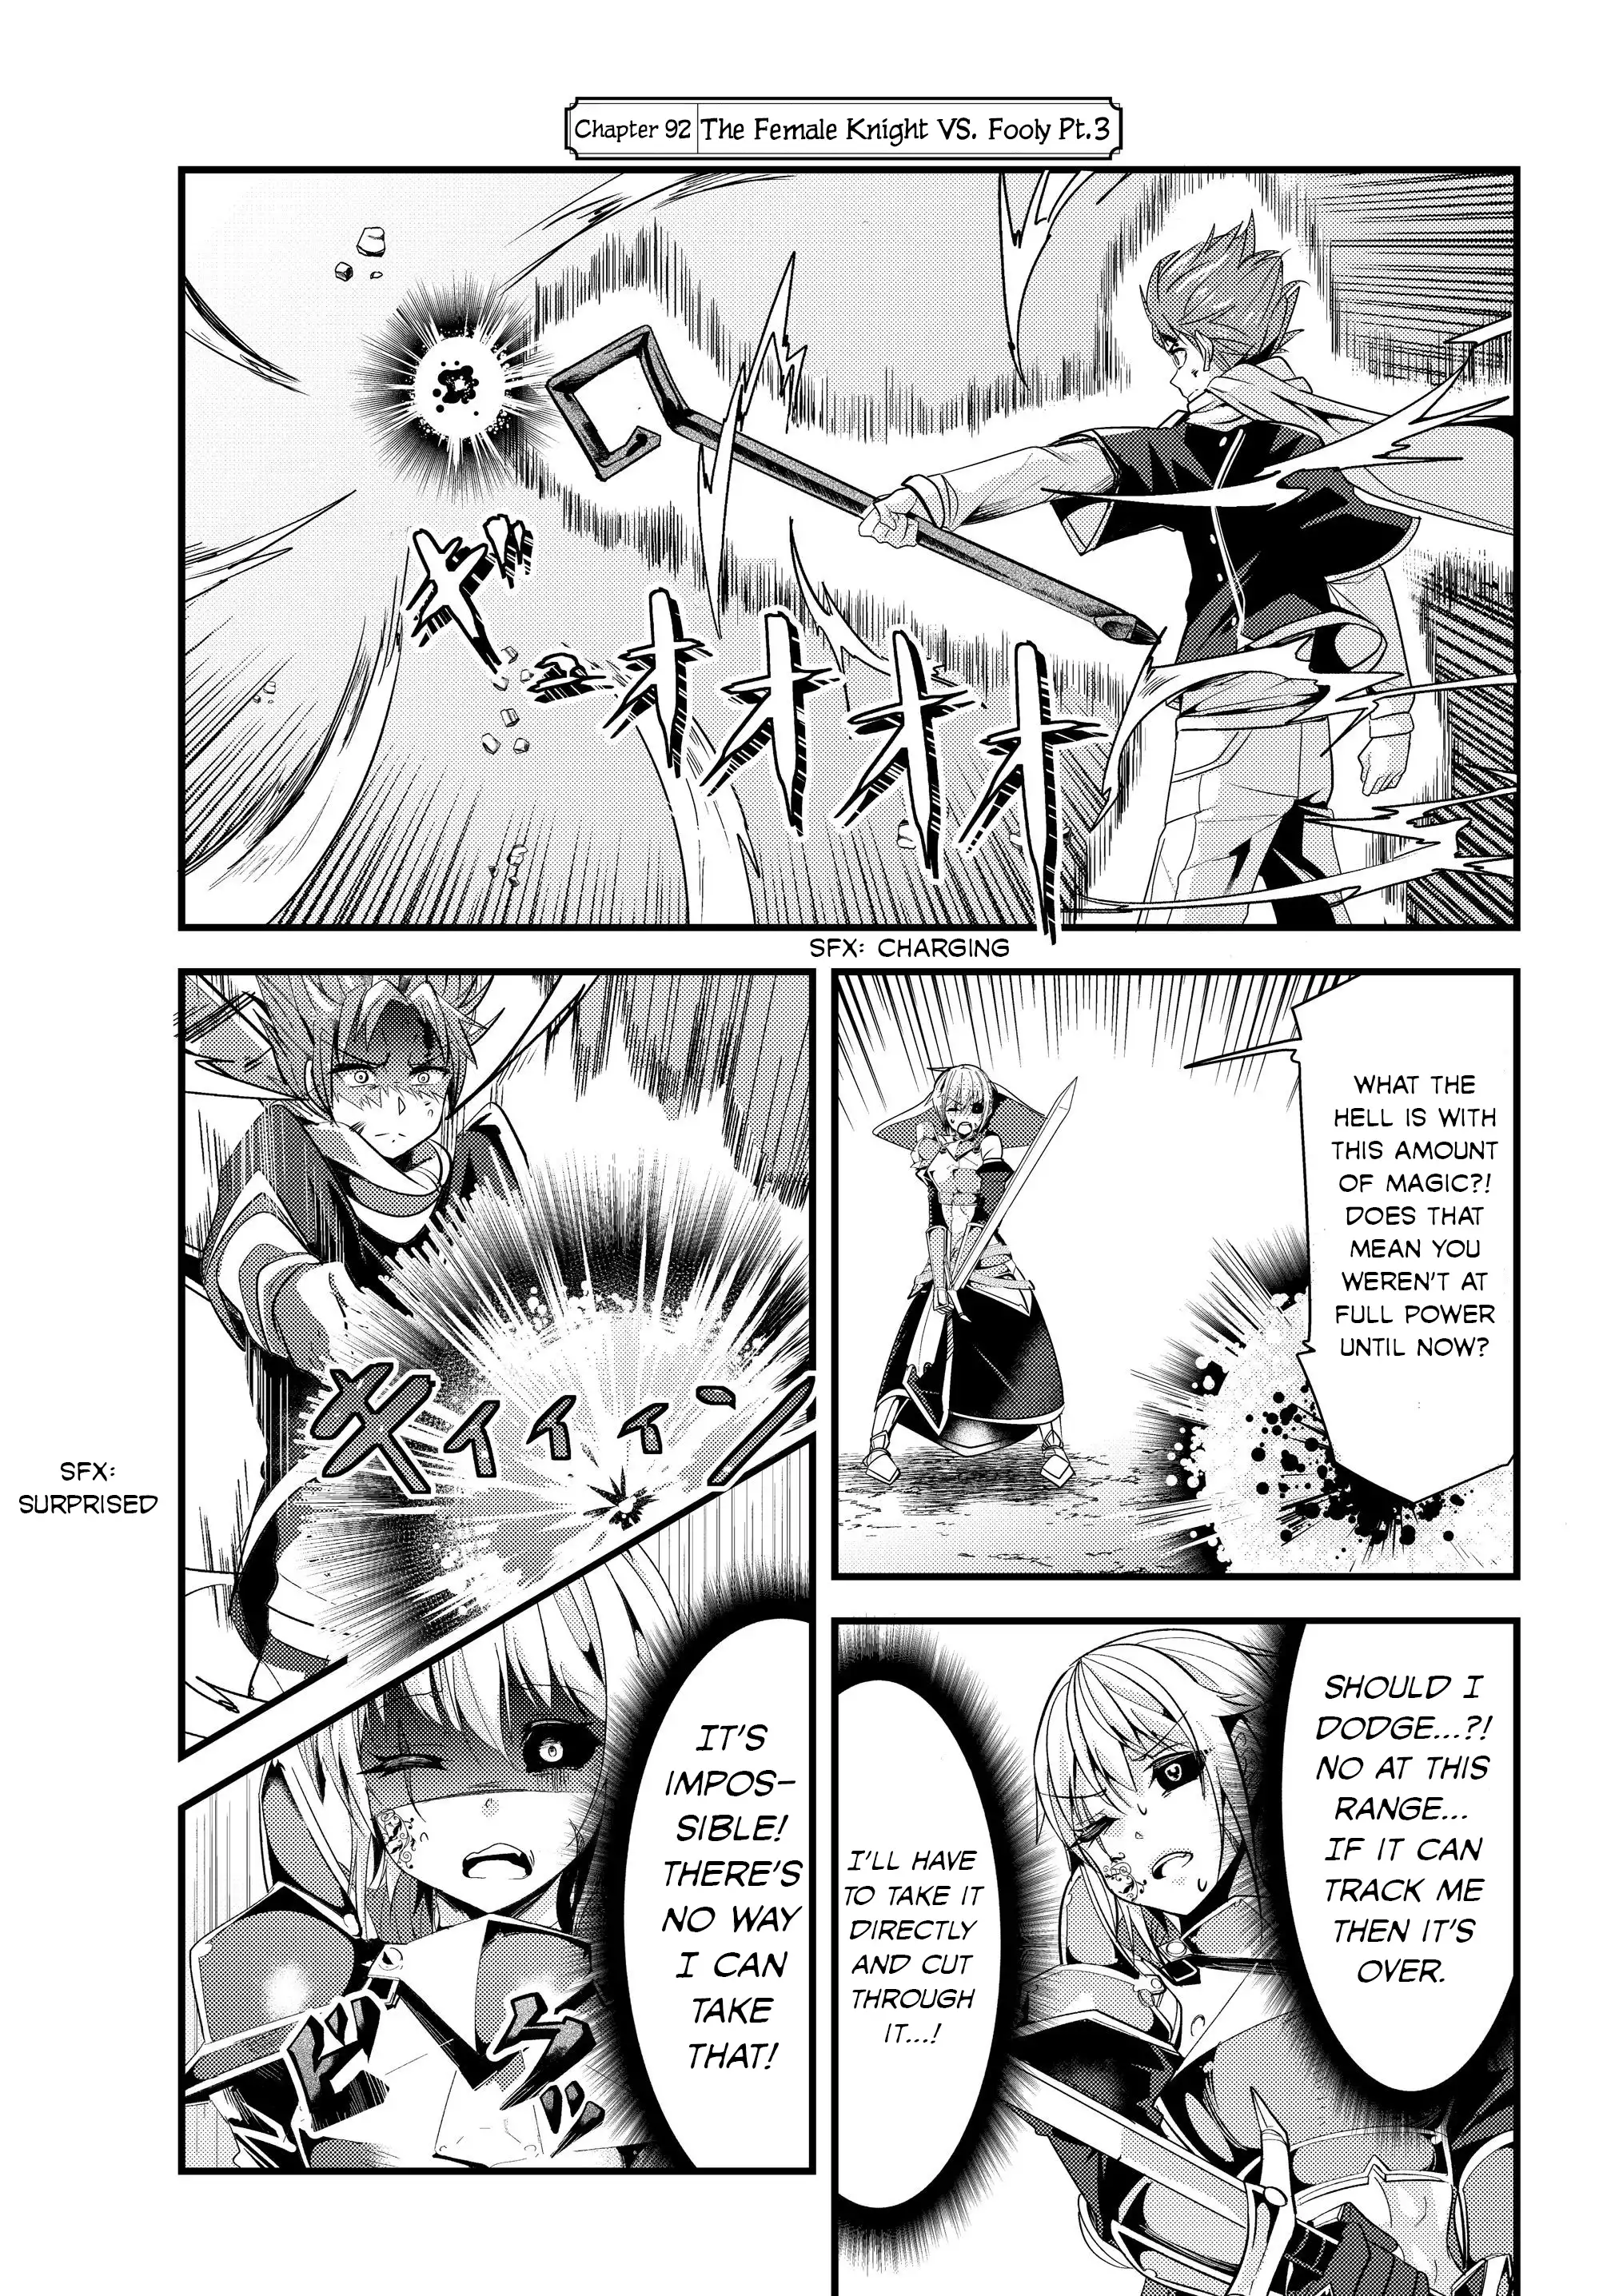 A Story About Treating a Female Knight, Who Has Never Been Treated as a Woman, as a Woman - Chapter 92 Page 1